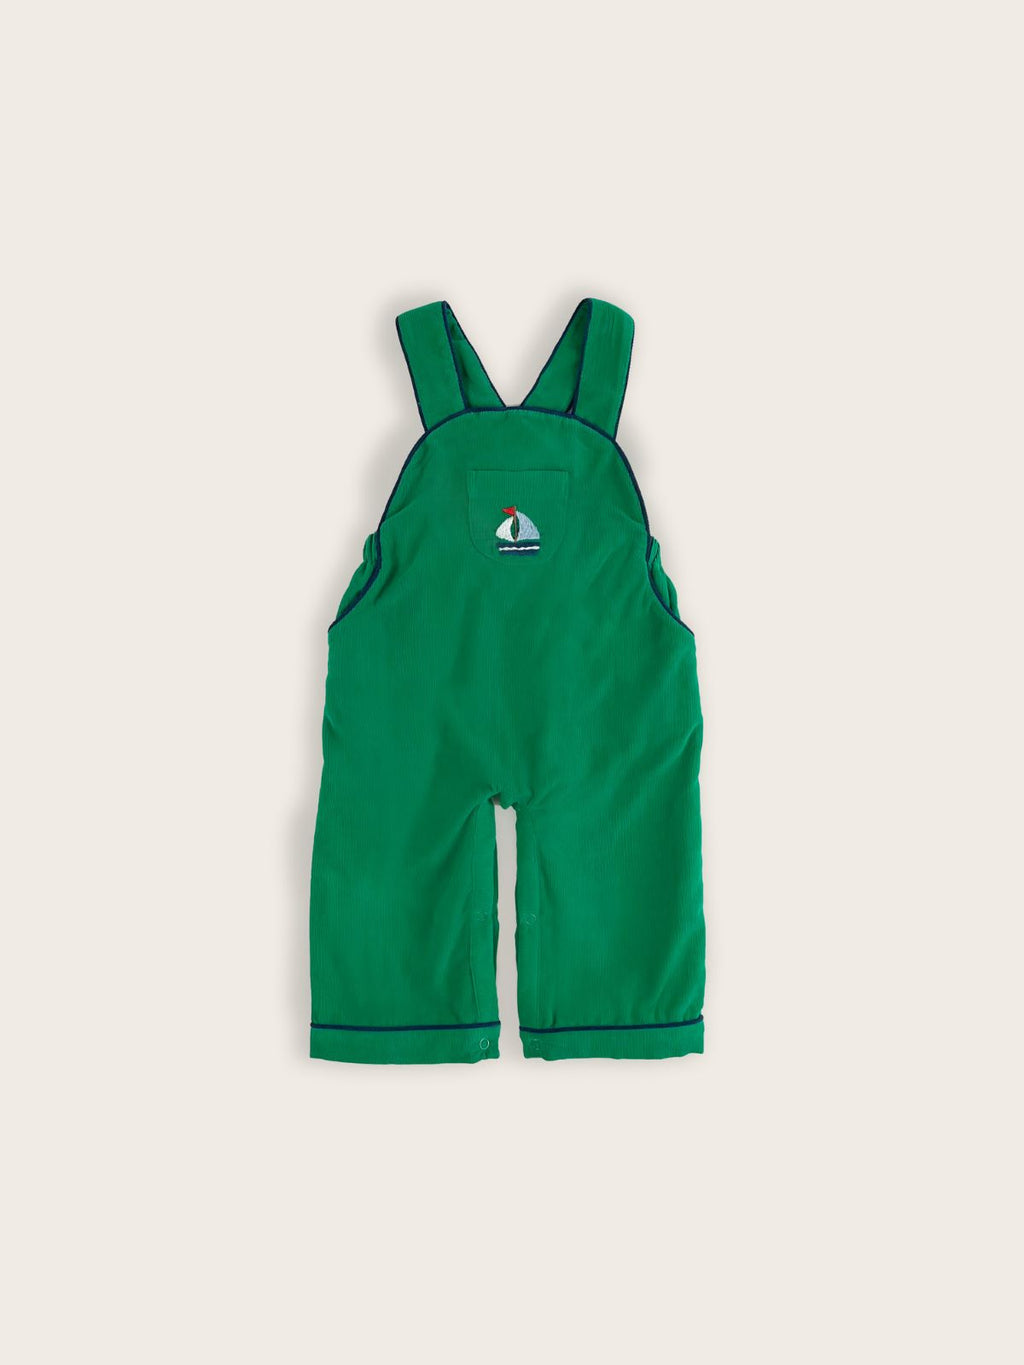 Green corduroy children's overalls featuring a front middle pocket with a blue sailboat embroidered.